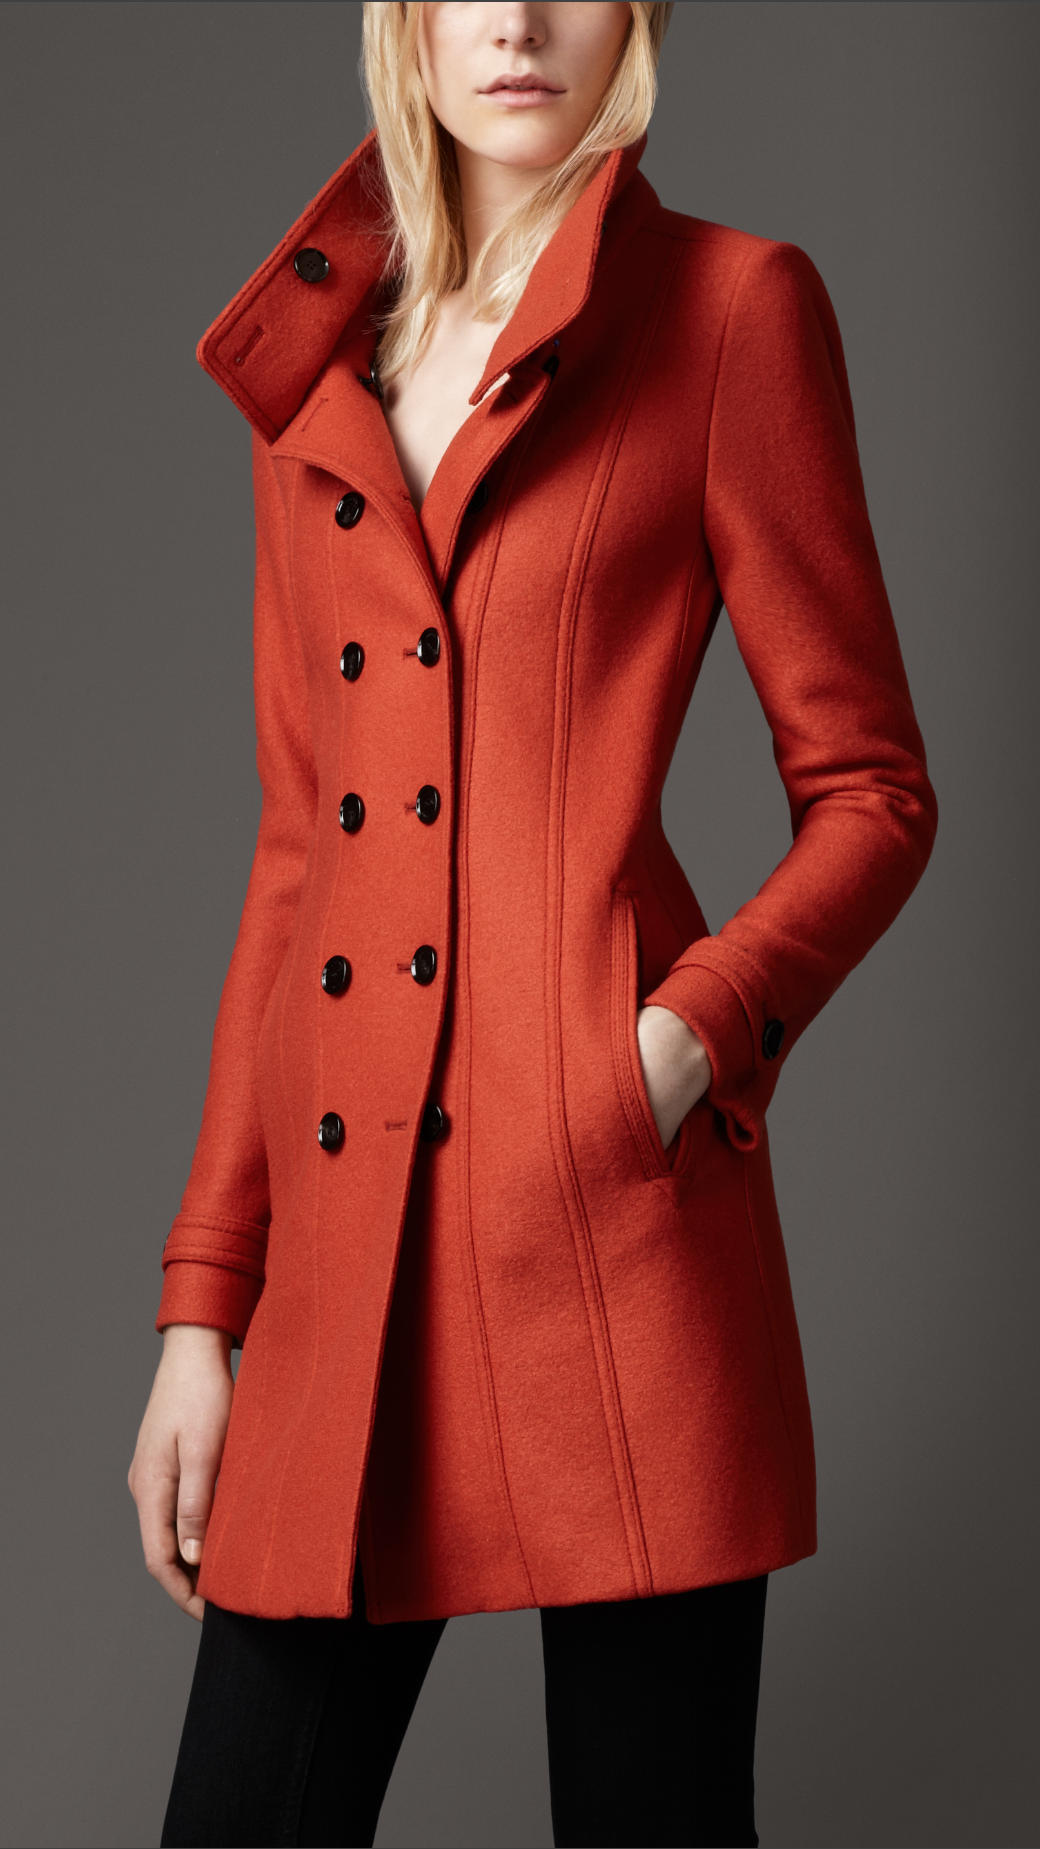 Lyst - Burberry Wool A-Line Coat in Red